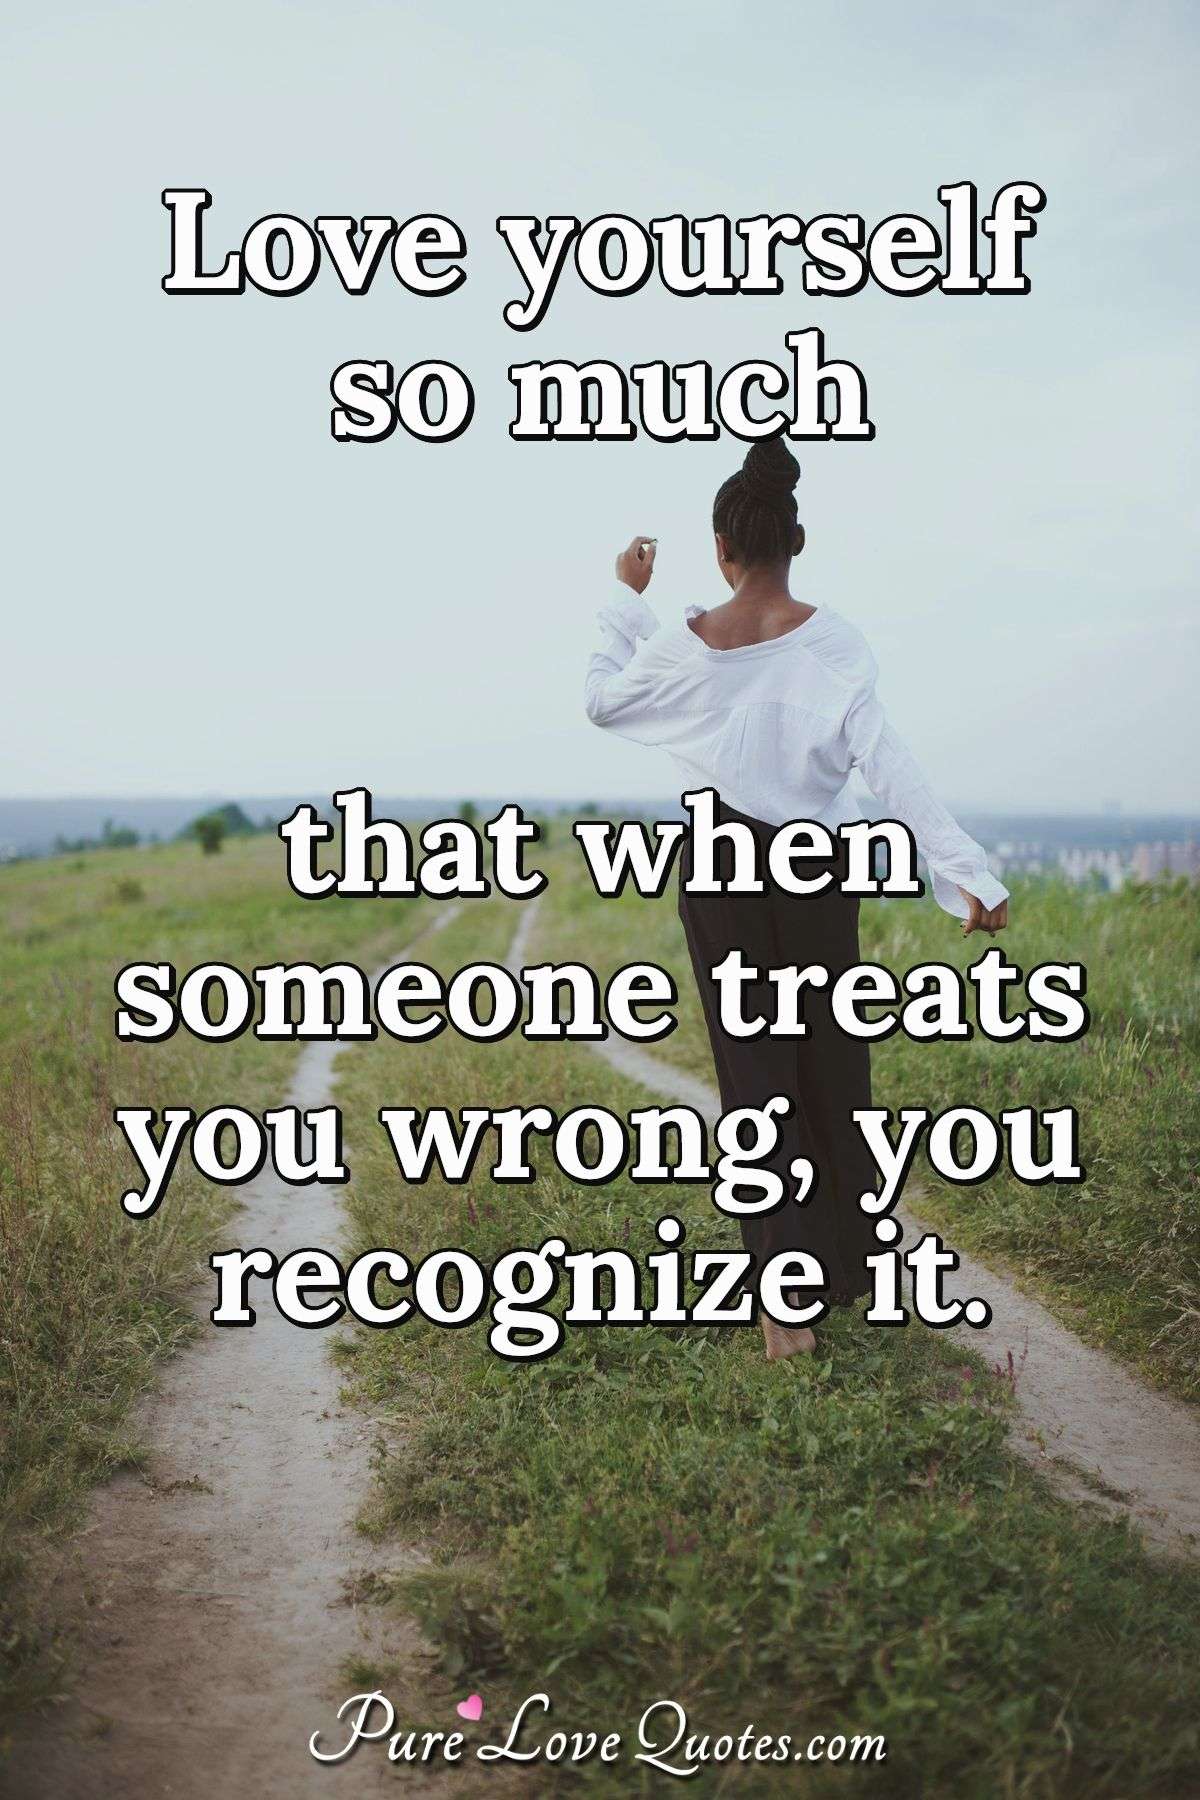 Love yourself so much that when someone treats you wrong, you recognize it. - Anonymous